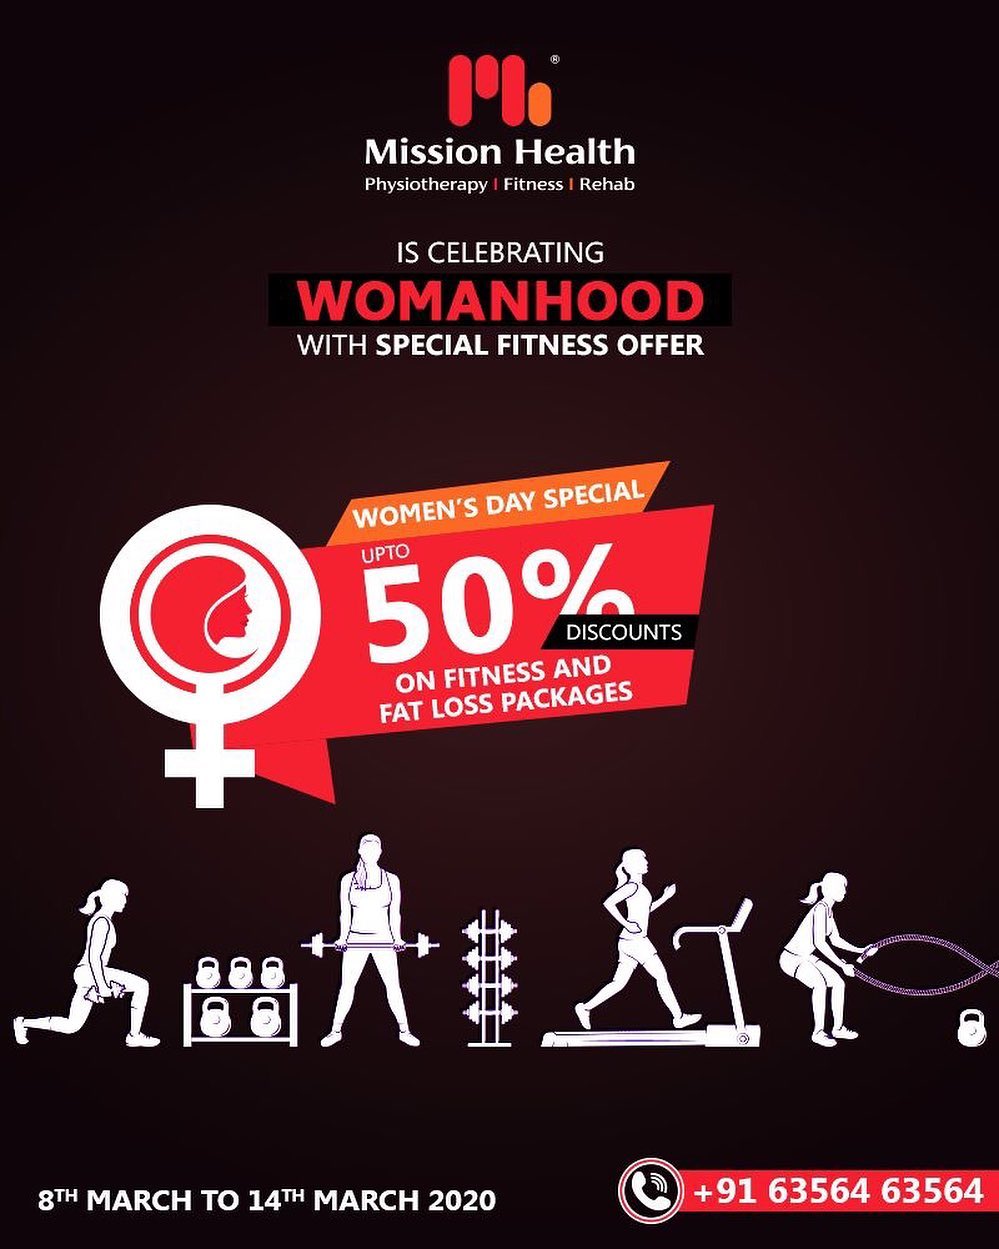 This Women's Day, Pledge to be the new YOU with our special offer!

Mission Health Fitness Boutique is offering upto 50% Discounts on various Fitness & Fat Loss Packages

Call: +916356463564
Visit: www.missionhealth.co.in

#WomensDay #Women #WomensDay2020 #RespectWomen  #InternationalWomensDay2020 #EachforEqual #InternationalWomensDay #fitnessworkout #fitness #fitnessmotivation #workout #fitnesslife #gym #workoutmotivation #fitnessaddict #fitnesscoaching #healthchallenge #MissionHealth #MissionHealthIndia #MovementIsLife